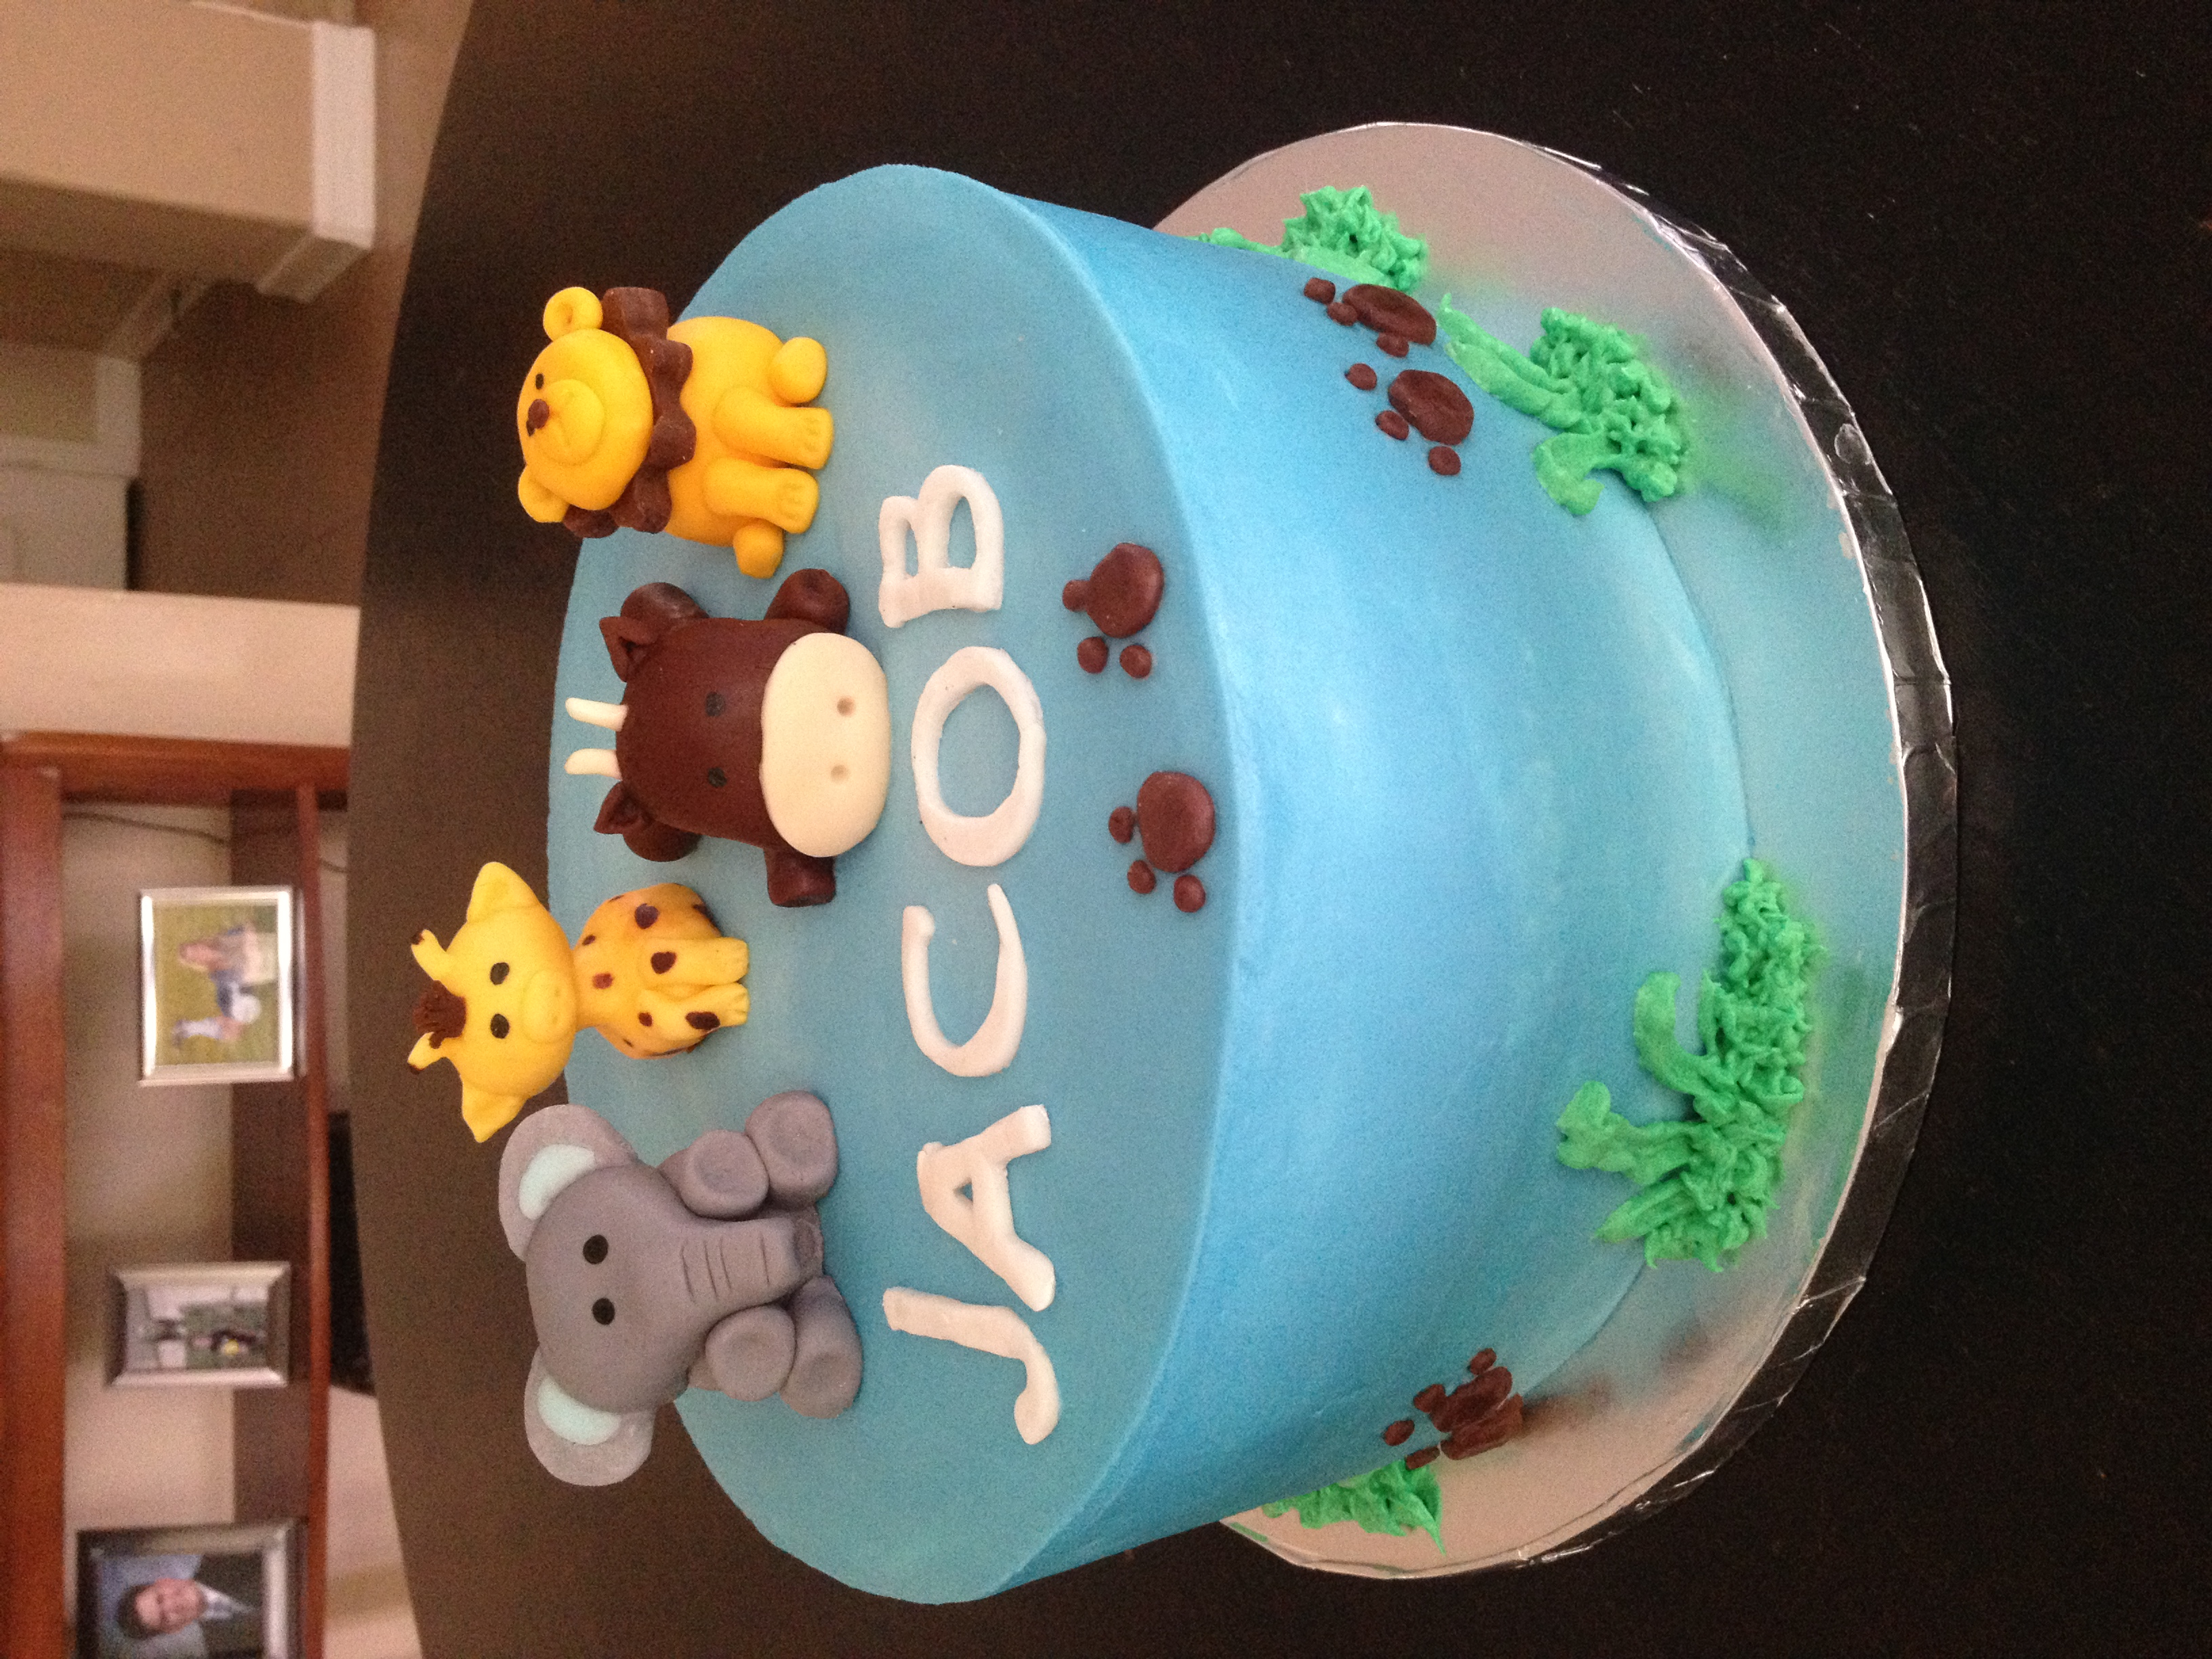 Zoo Themed Baby Shower Cake